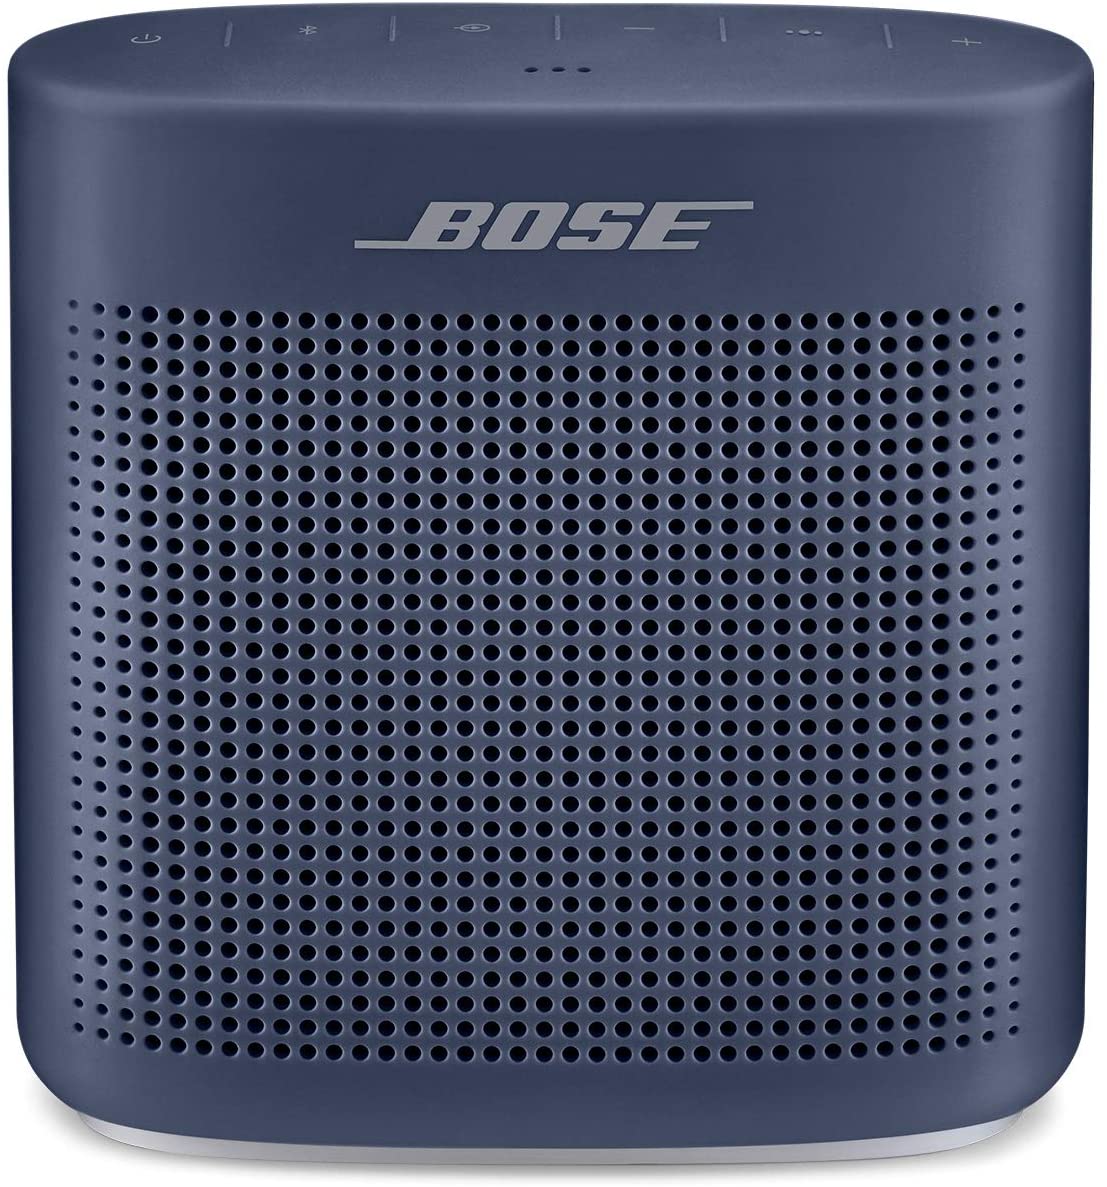 Black Friday drops price on Bose's small Bluetooth speaker with big